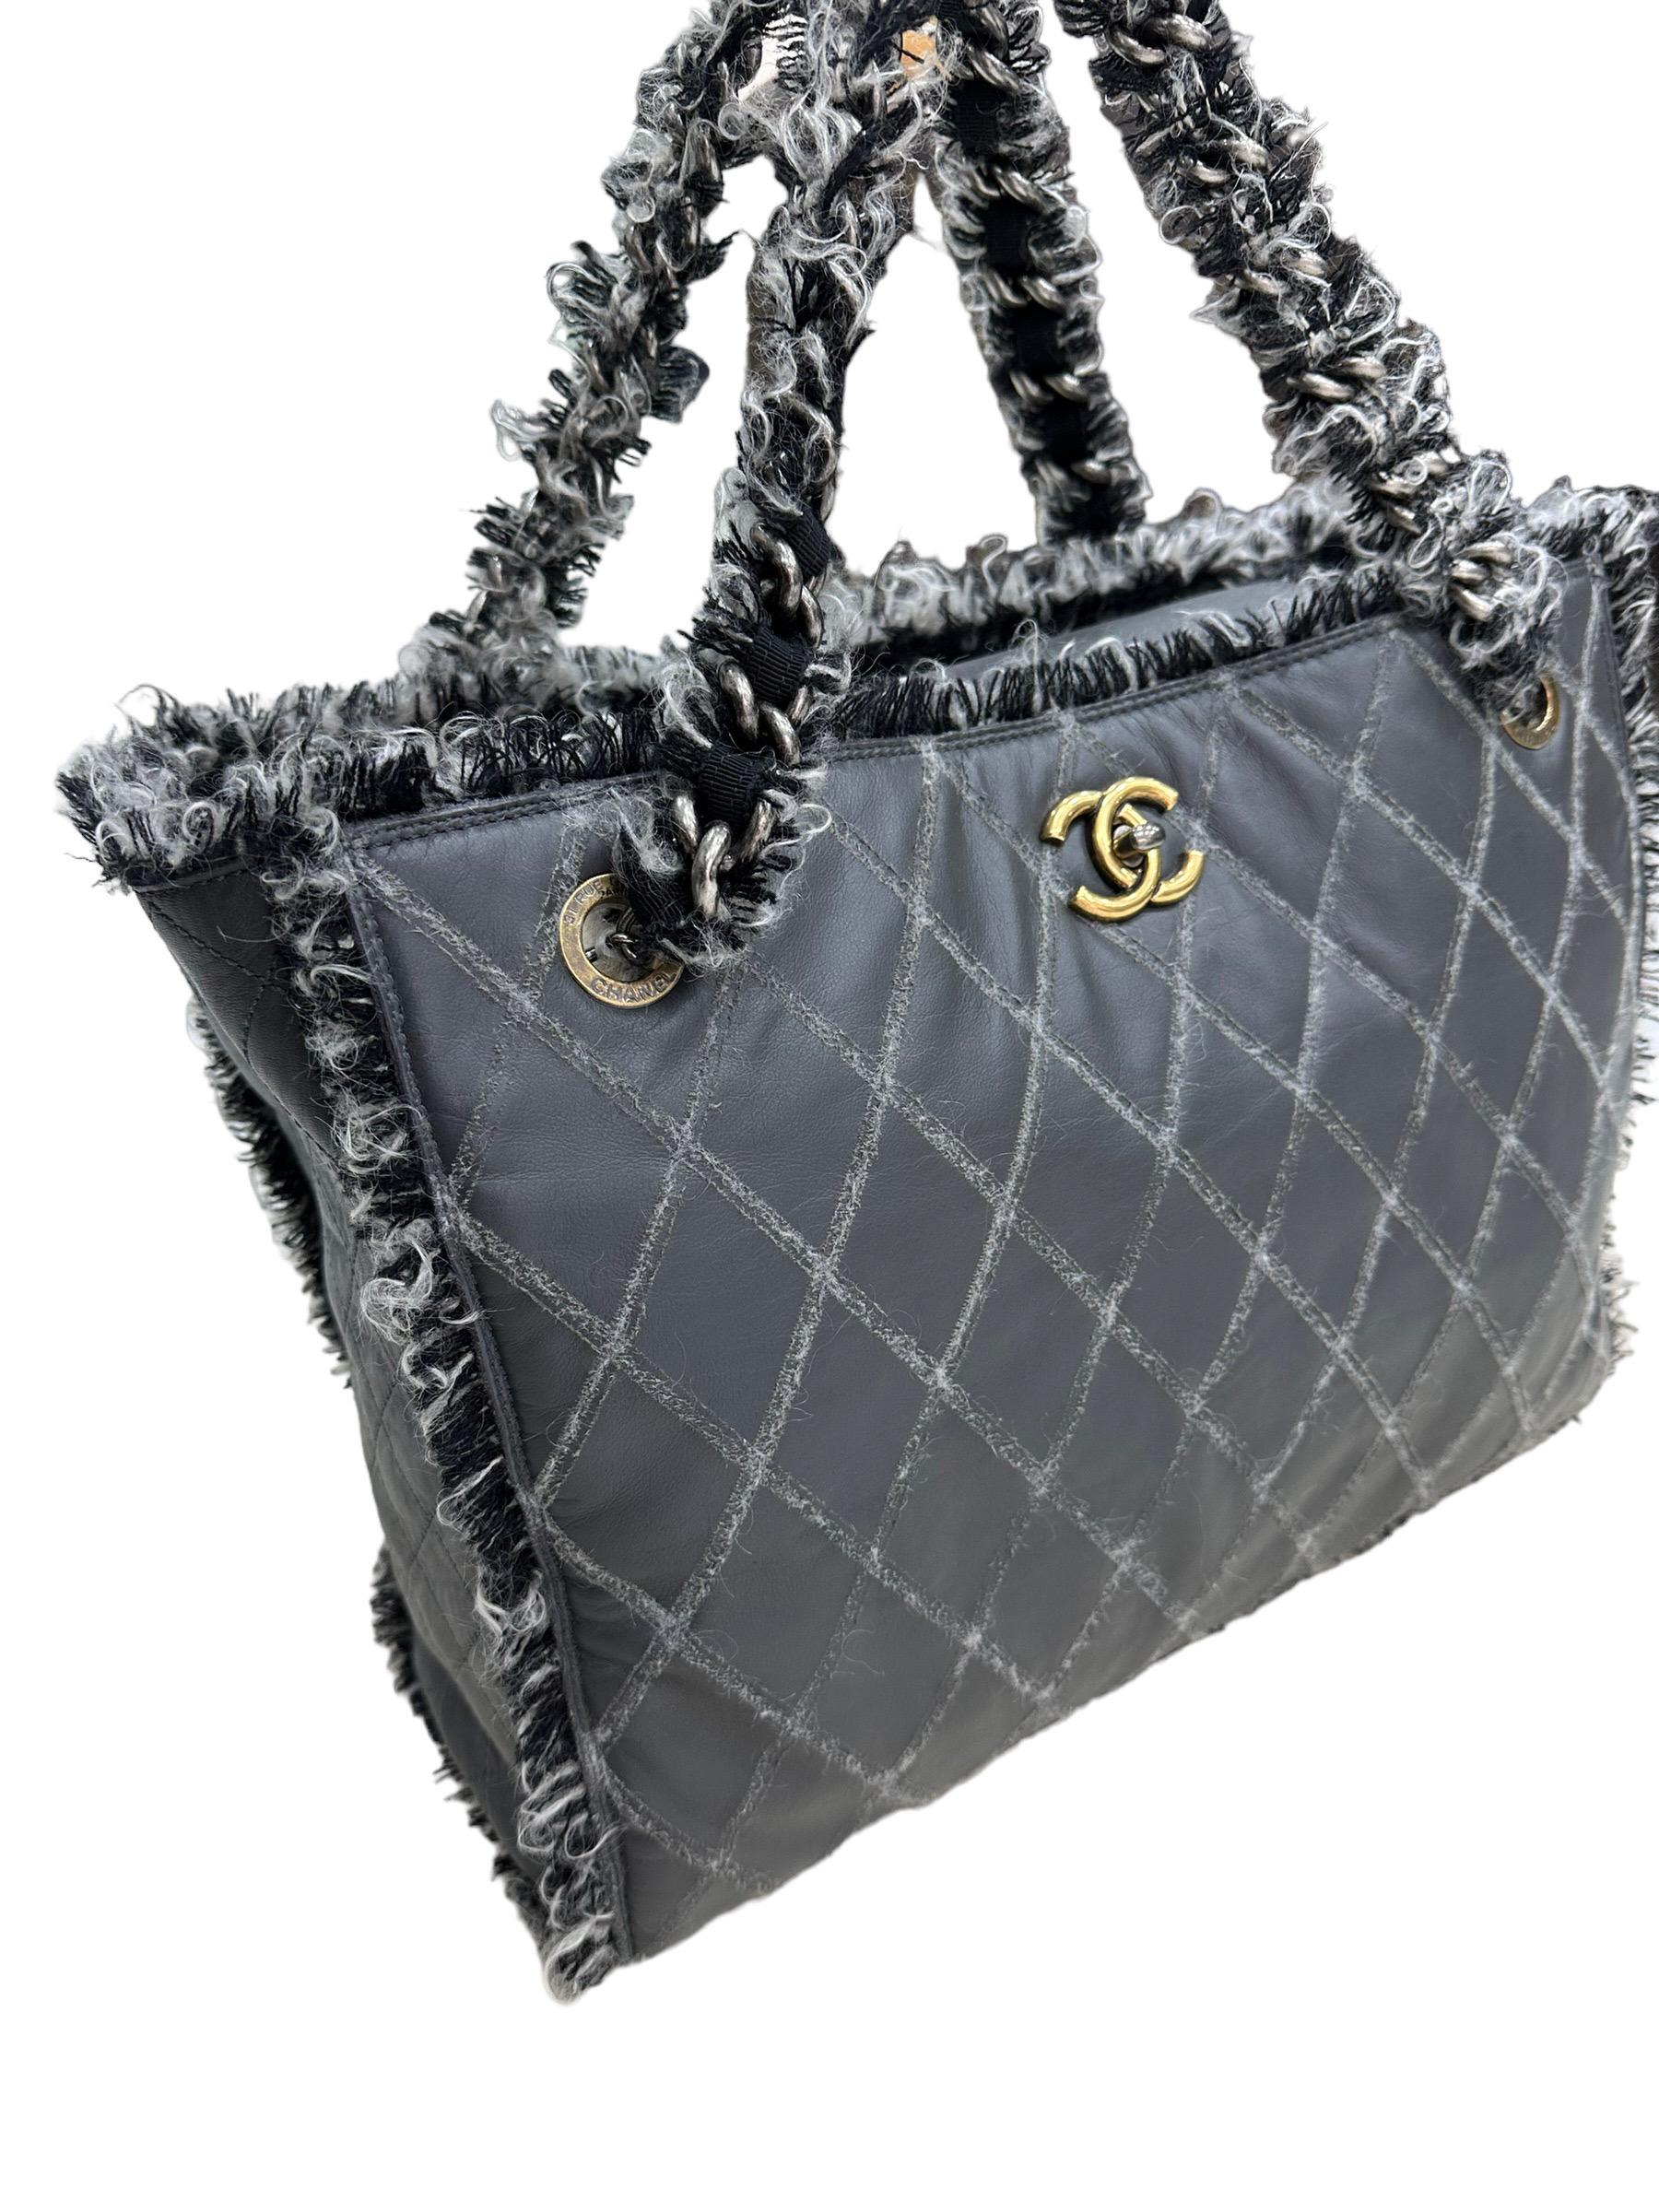 Chanel signed tote bag, made of gray canvas with tweed inserts and golden hardware. Equipped with a central flap with interlocking closure with a rotating CC logo. Internally lined in gray and black tweed, very roomy. Equipped with a double shoulder